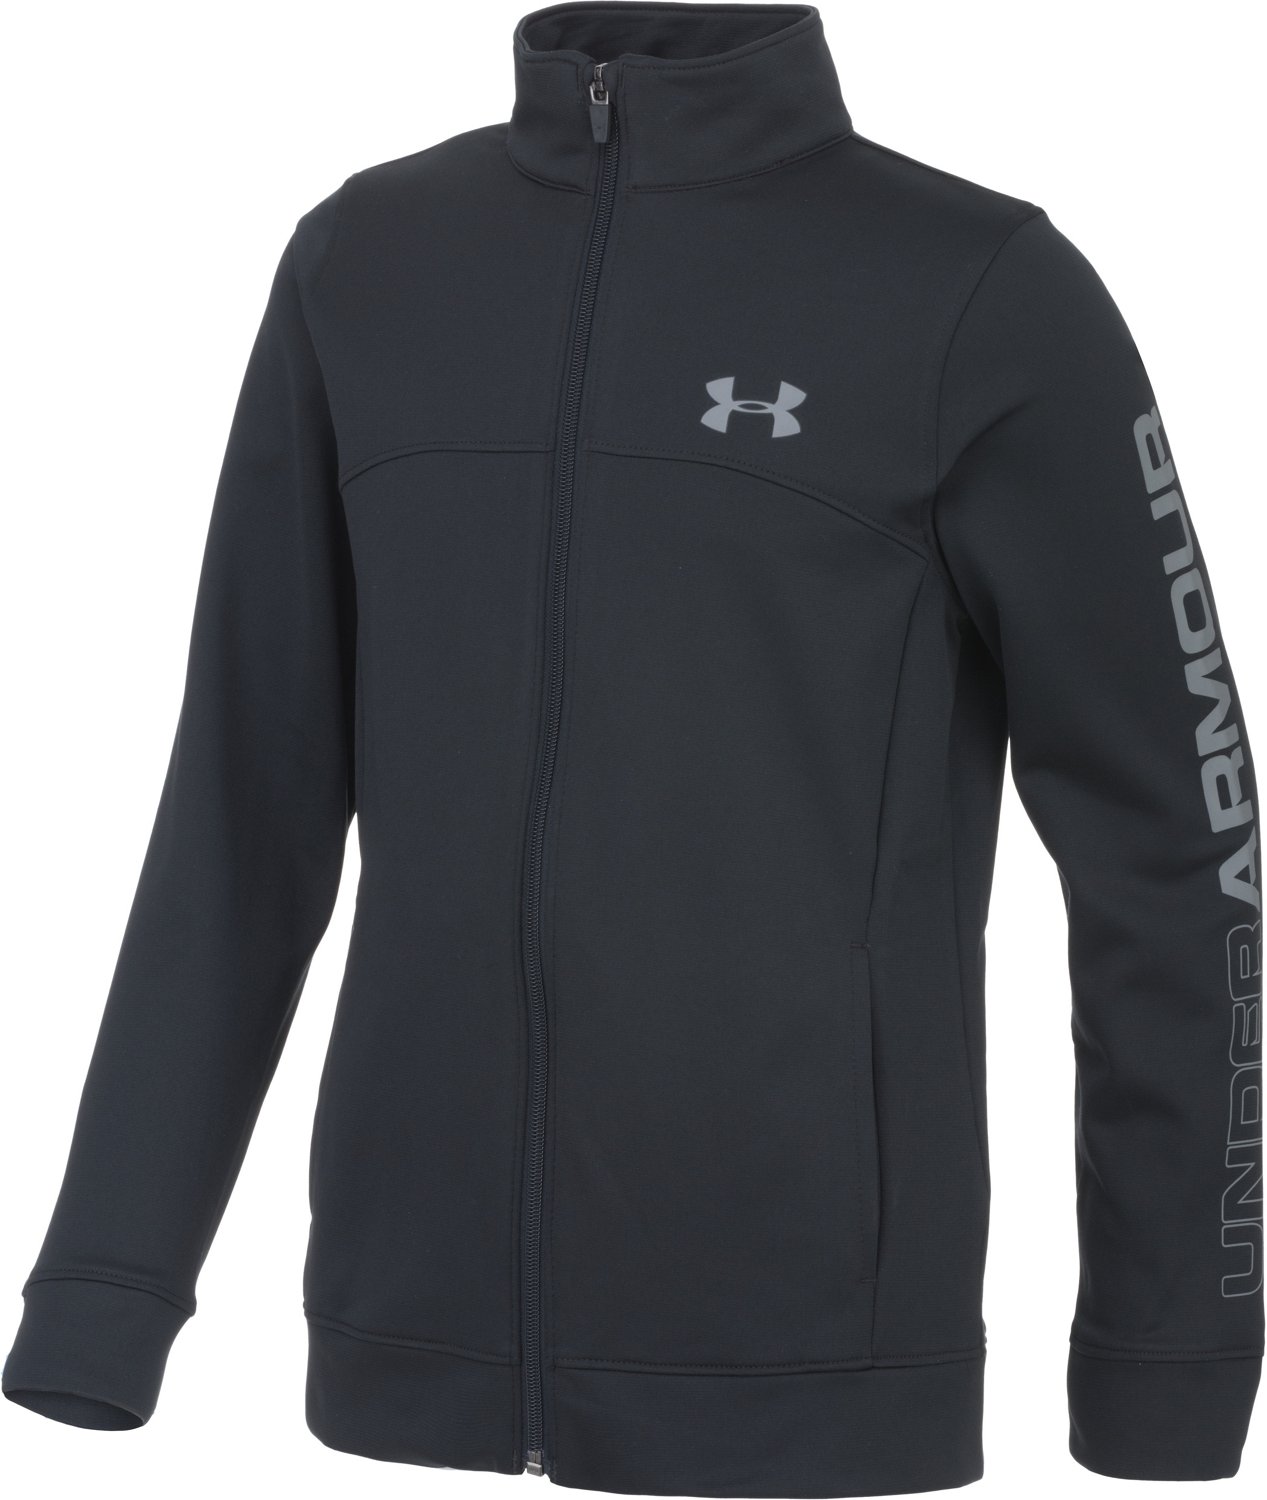 under armor jackets for kids